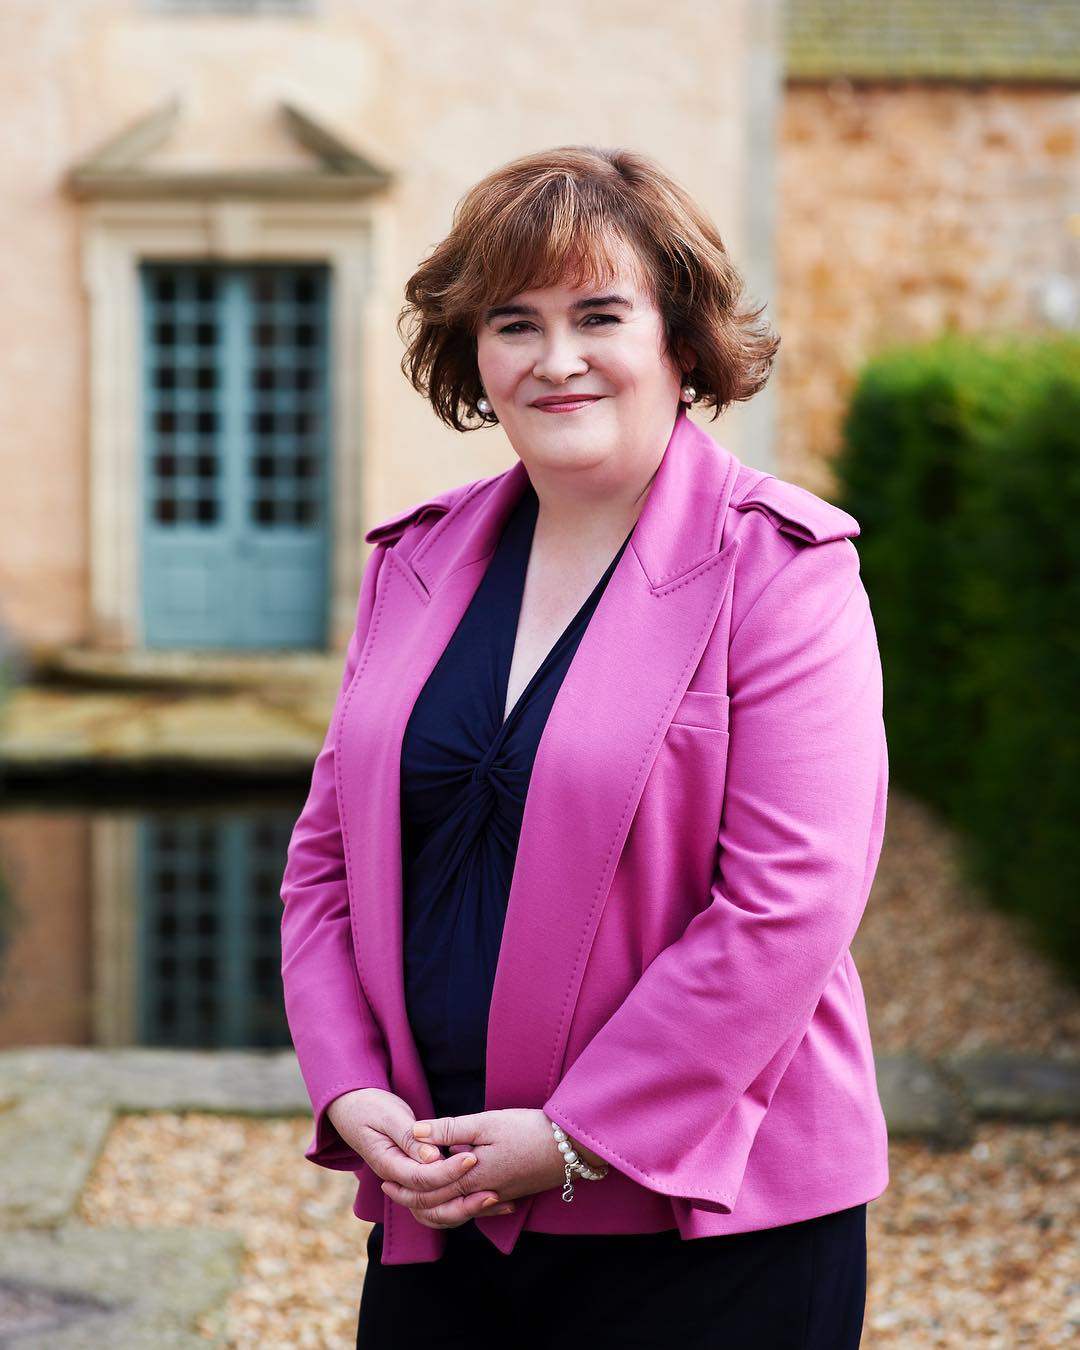 Susan Boyle’s audition at Britain’s Got Talent in 2009 turned her into a household name. Photo: @susanboylemusic/Instagram